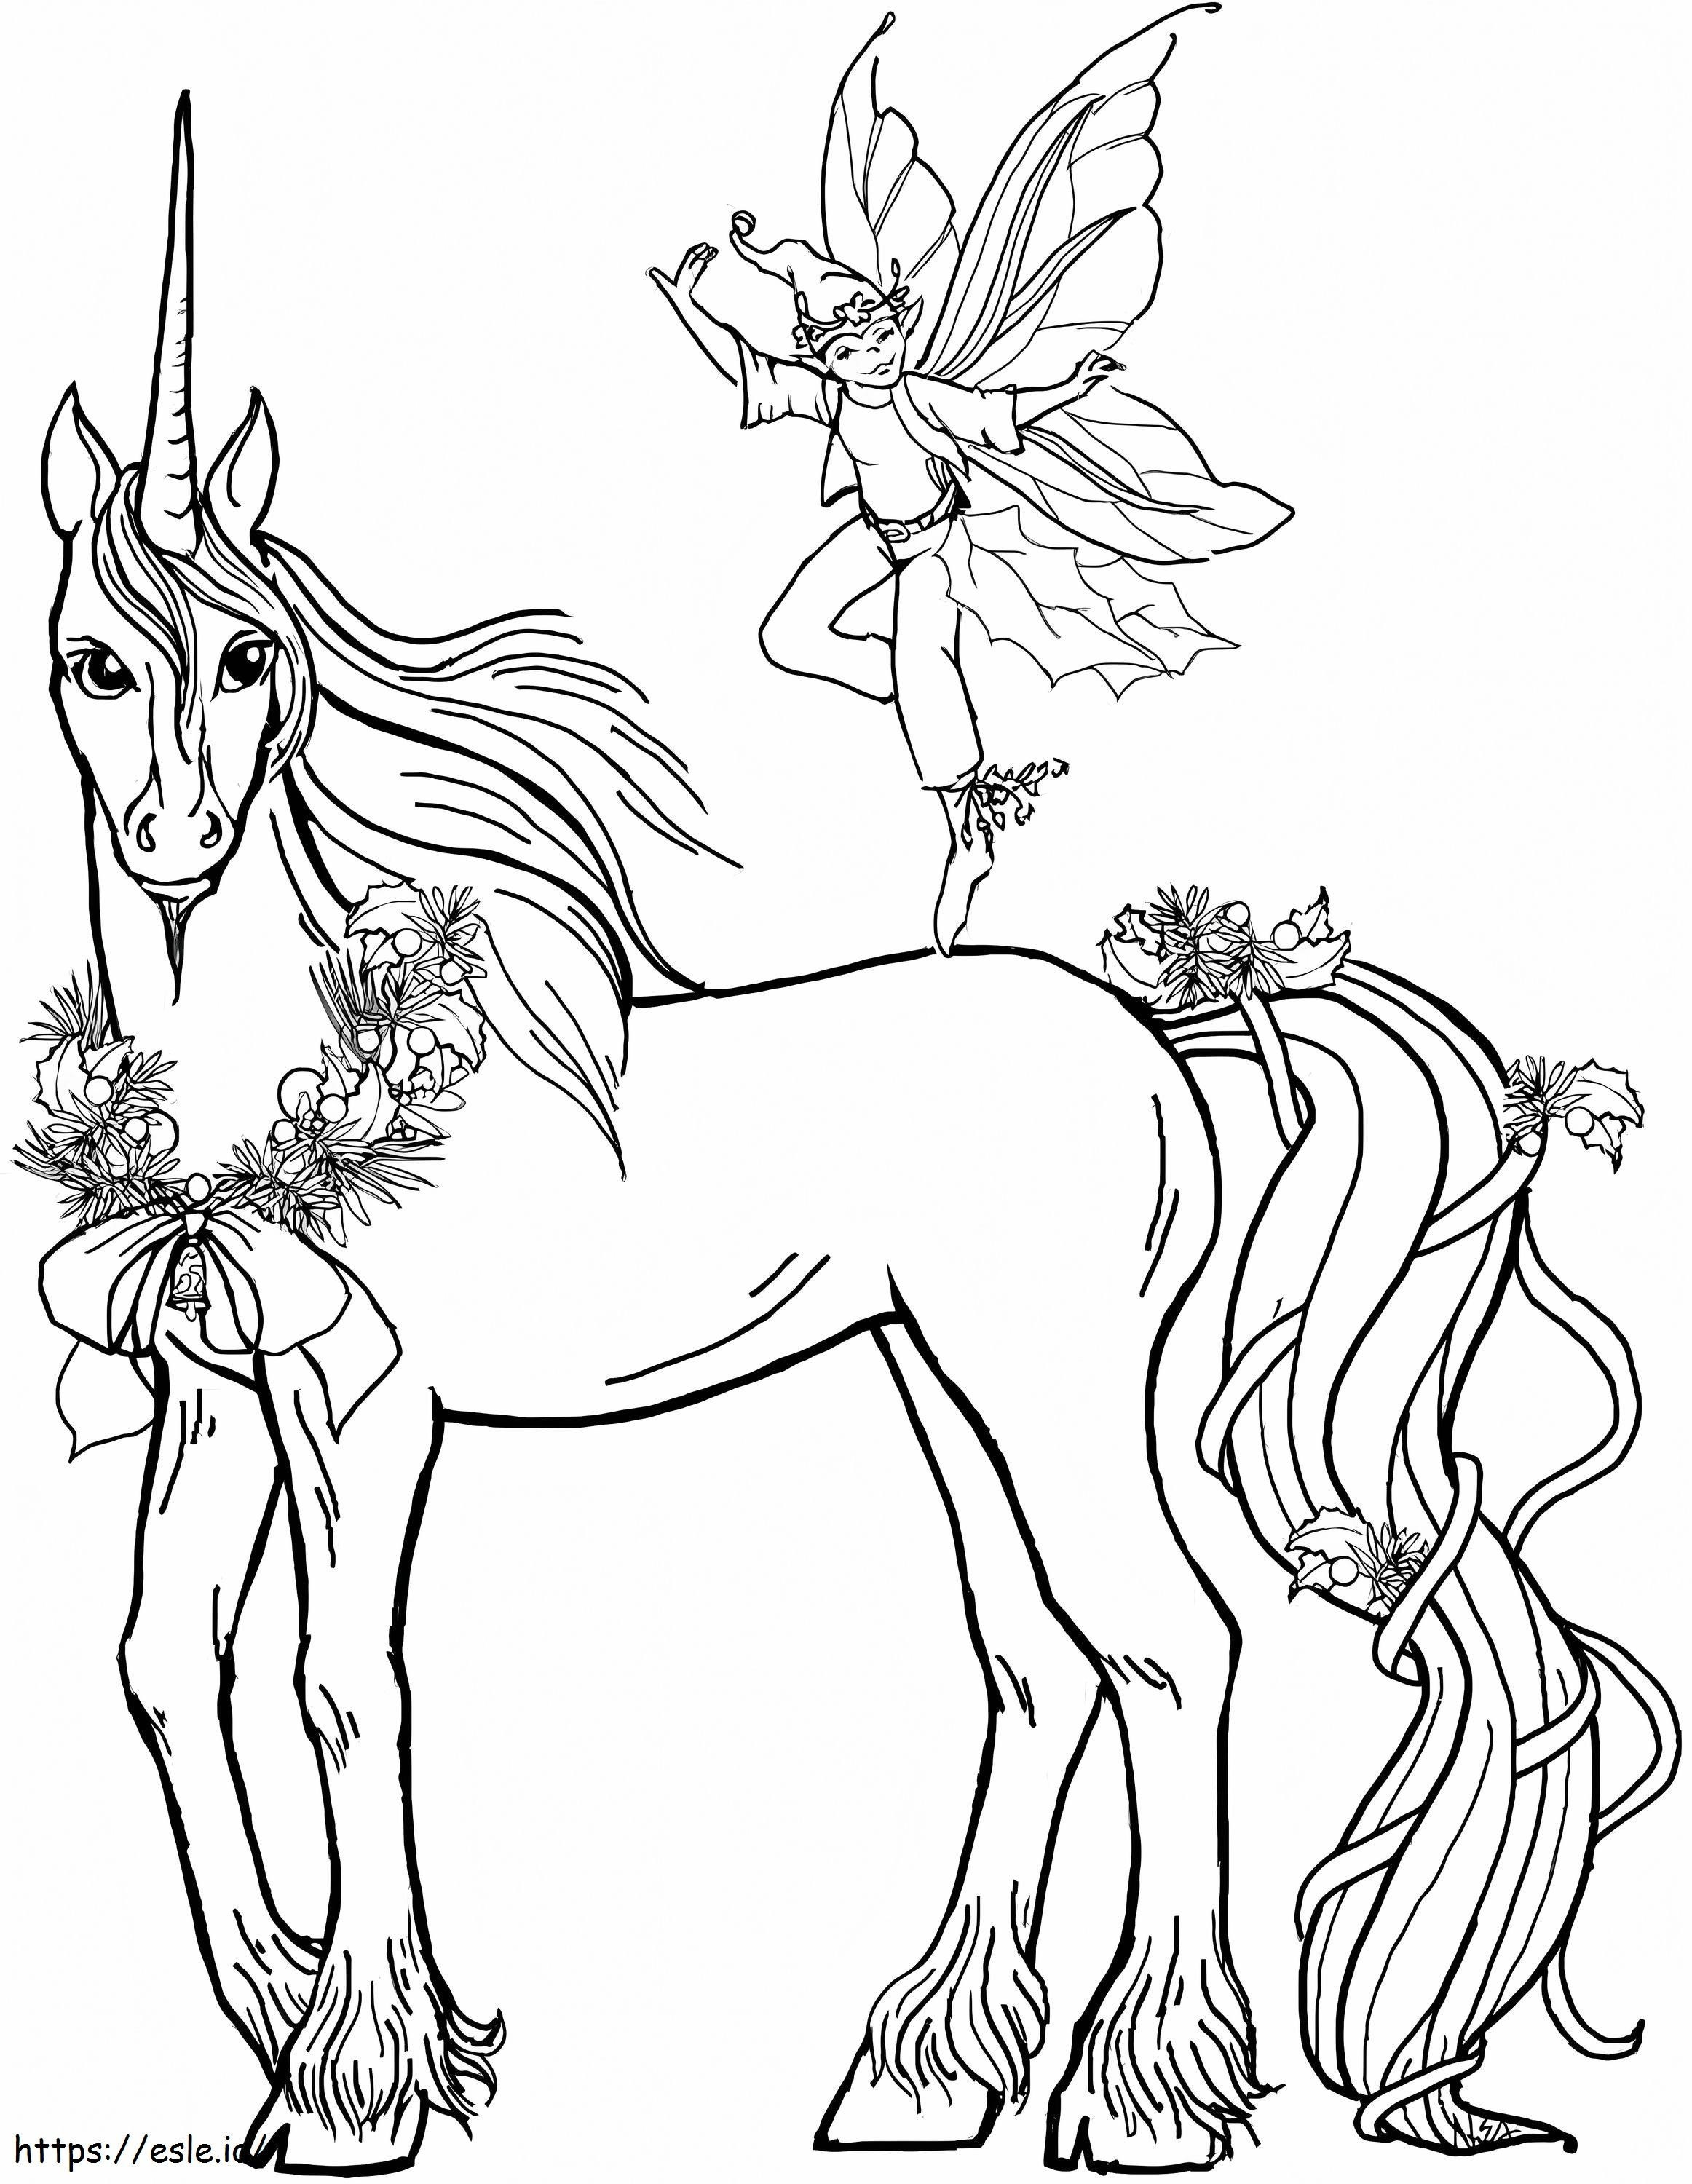 1563499031 Fairy And Unicorn A4 coloring page